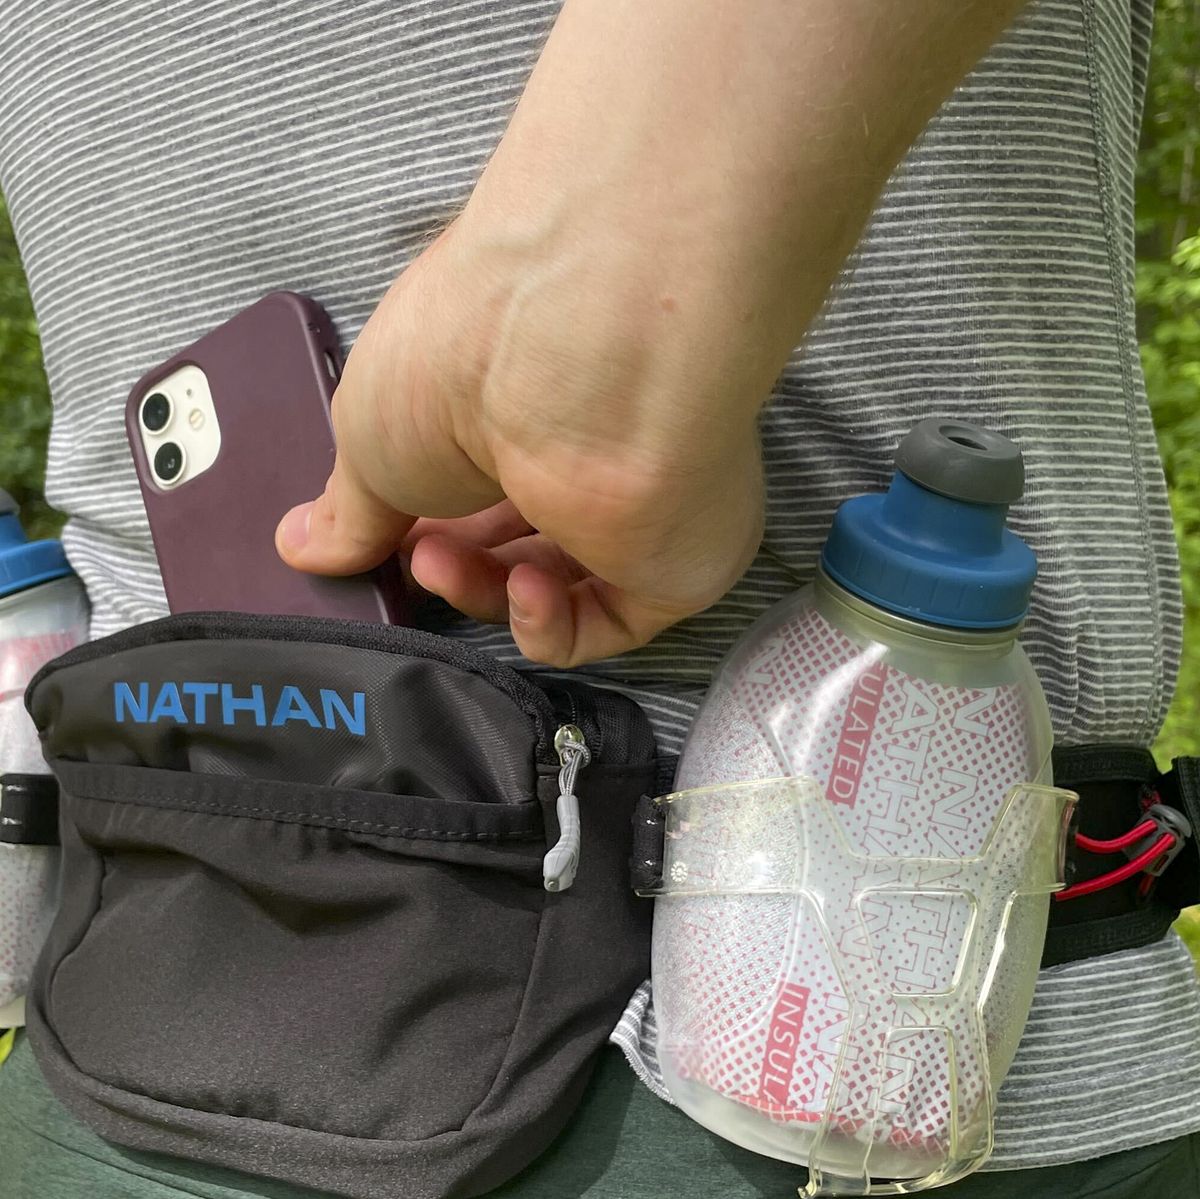 Stay hydrated in style with these water bottle bags